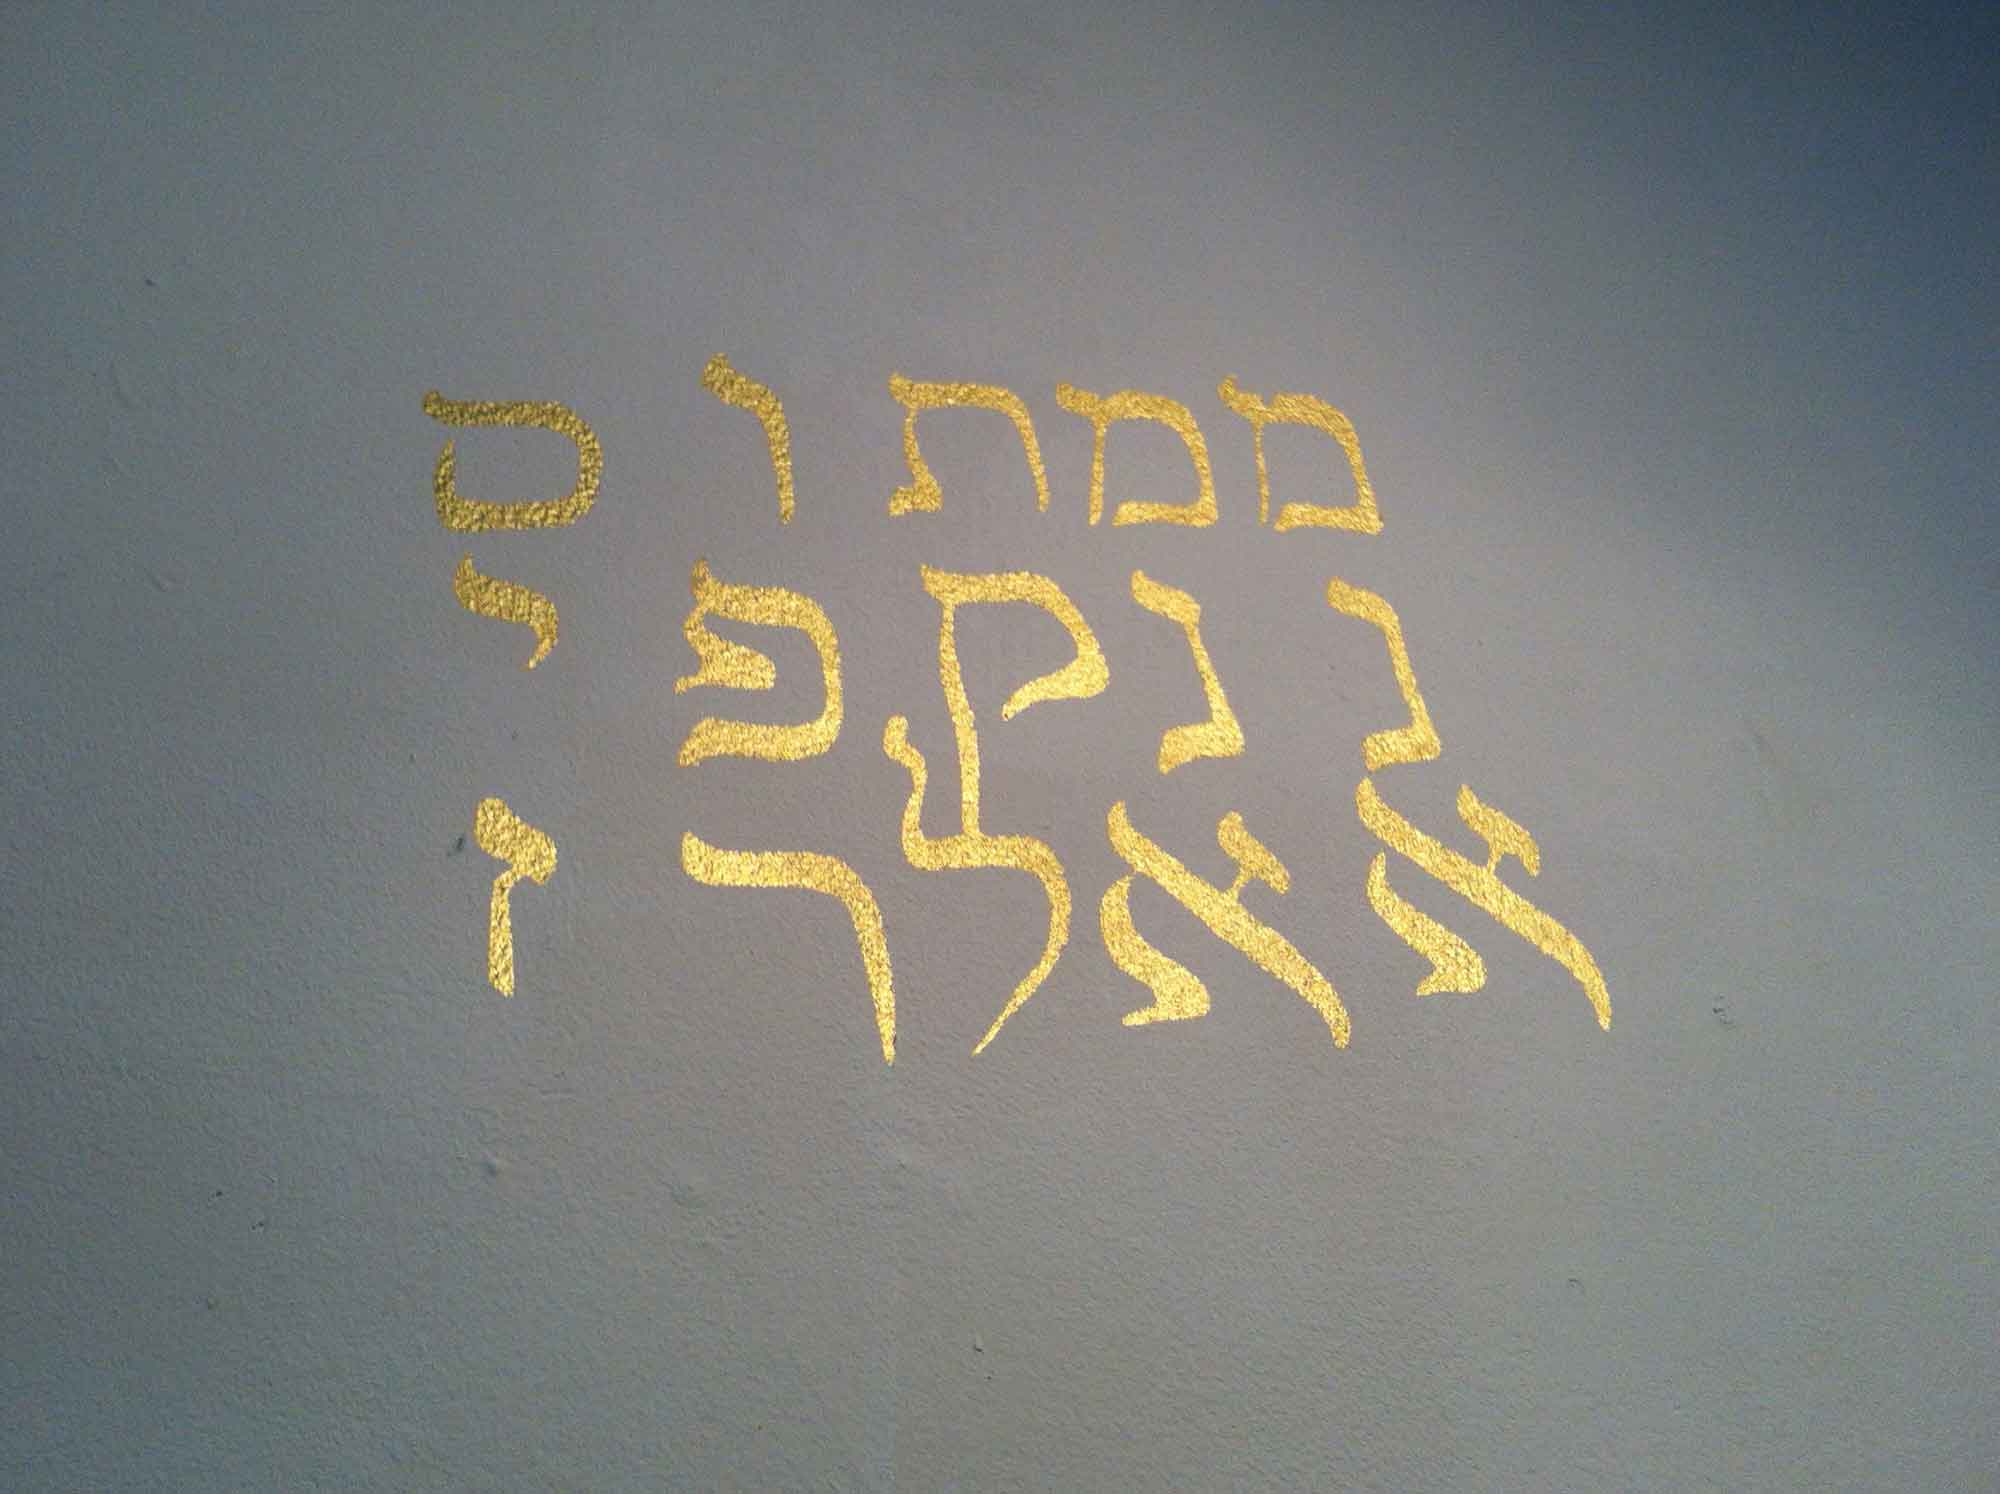 Installation view 4 / The Writing on the Wall, after Rembrandt (2014)